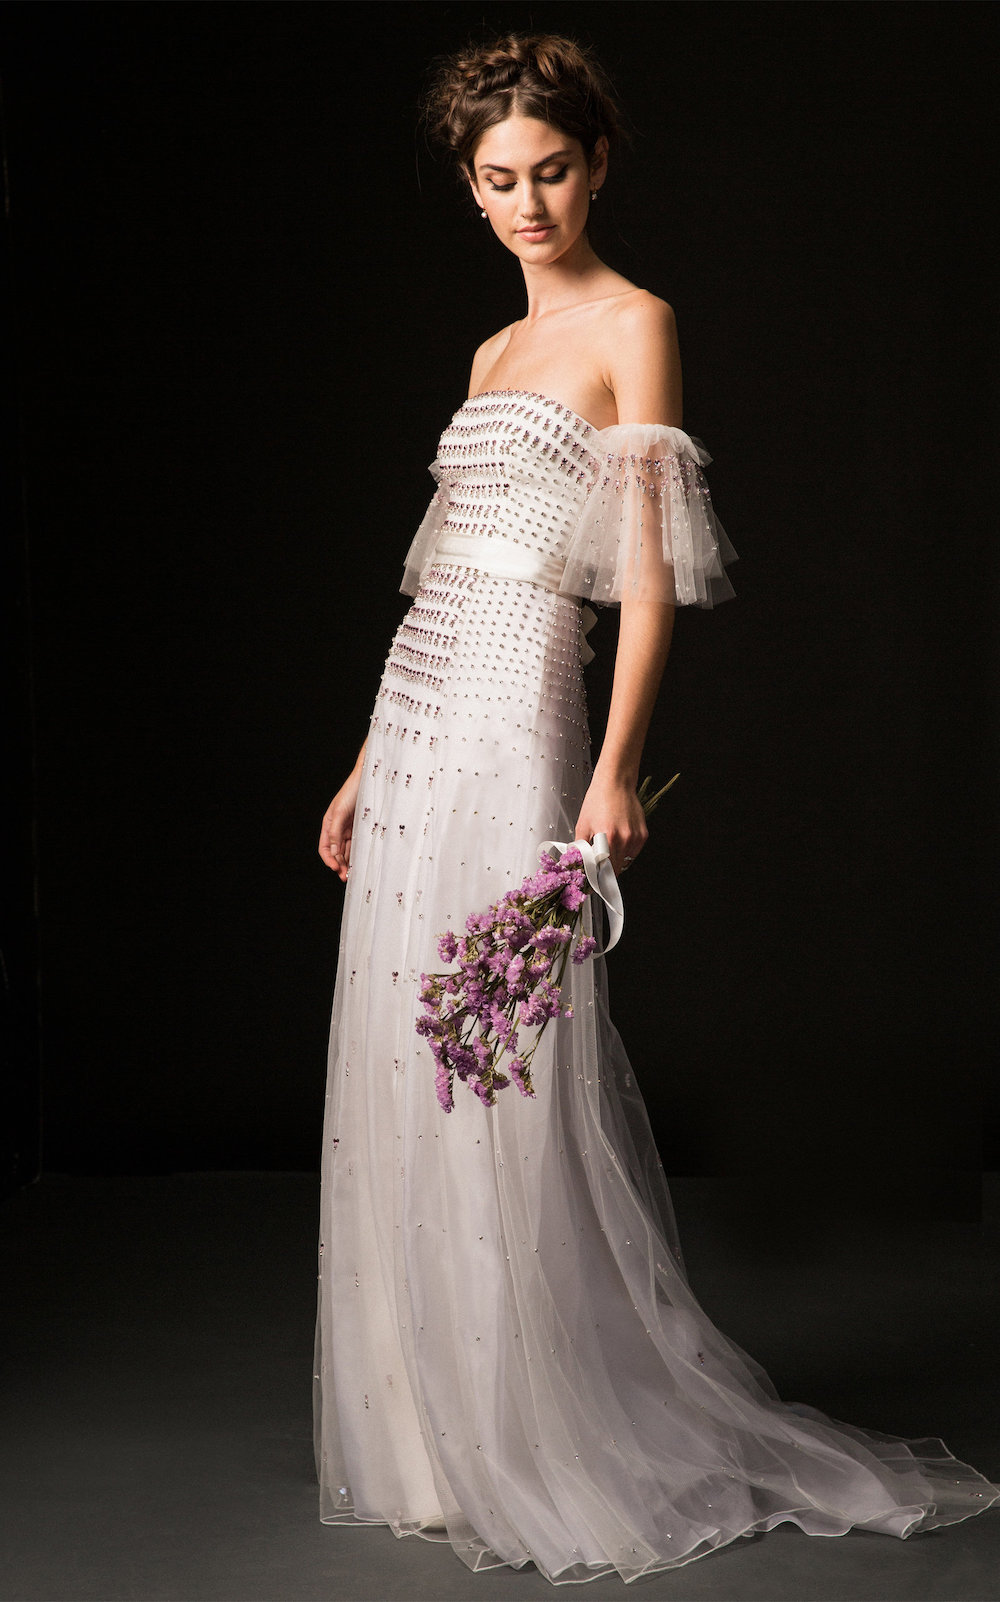 Orelia Gown from Temperley London | Vintage Bridal Gowns